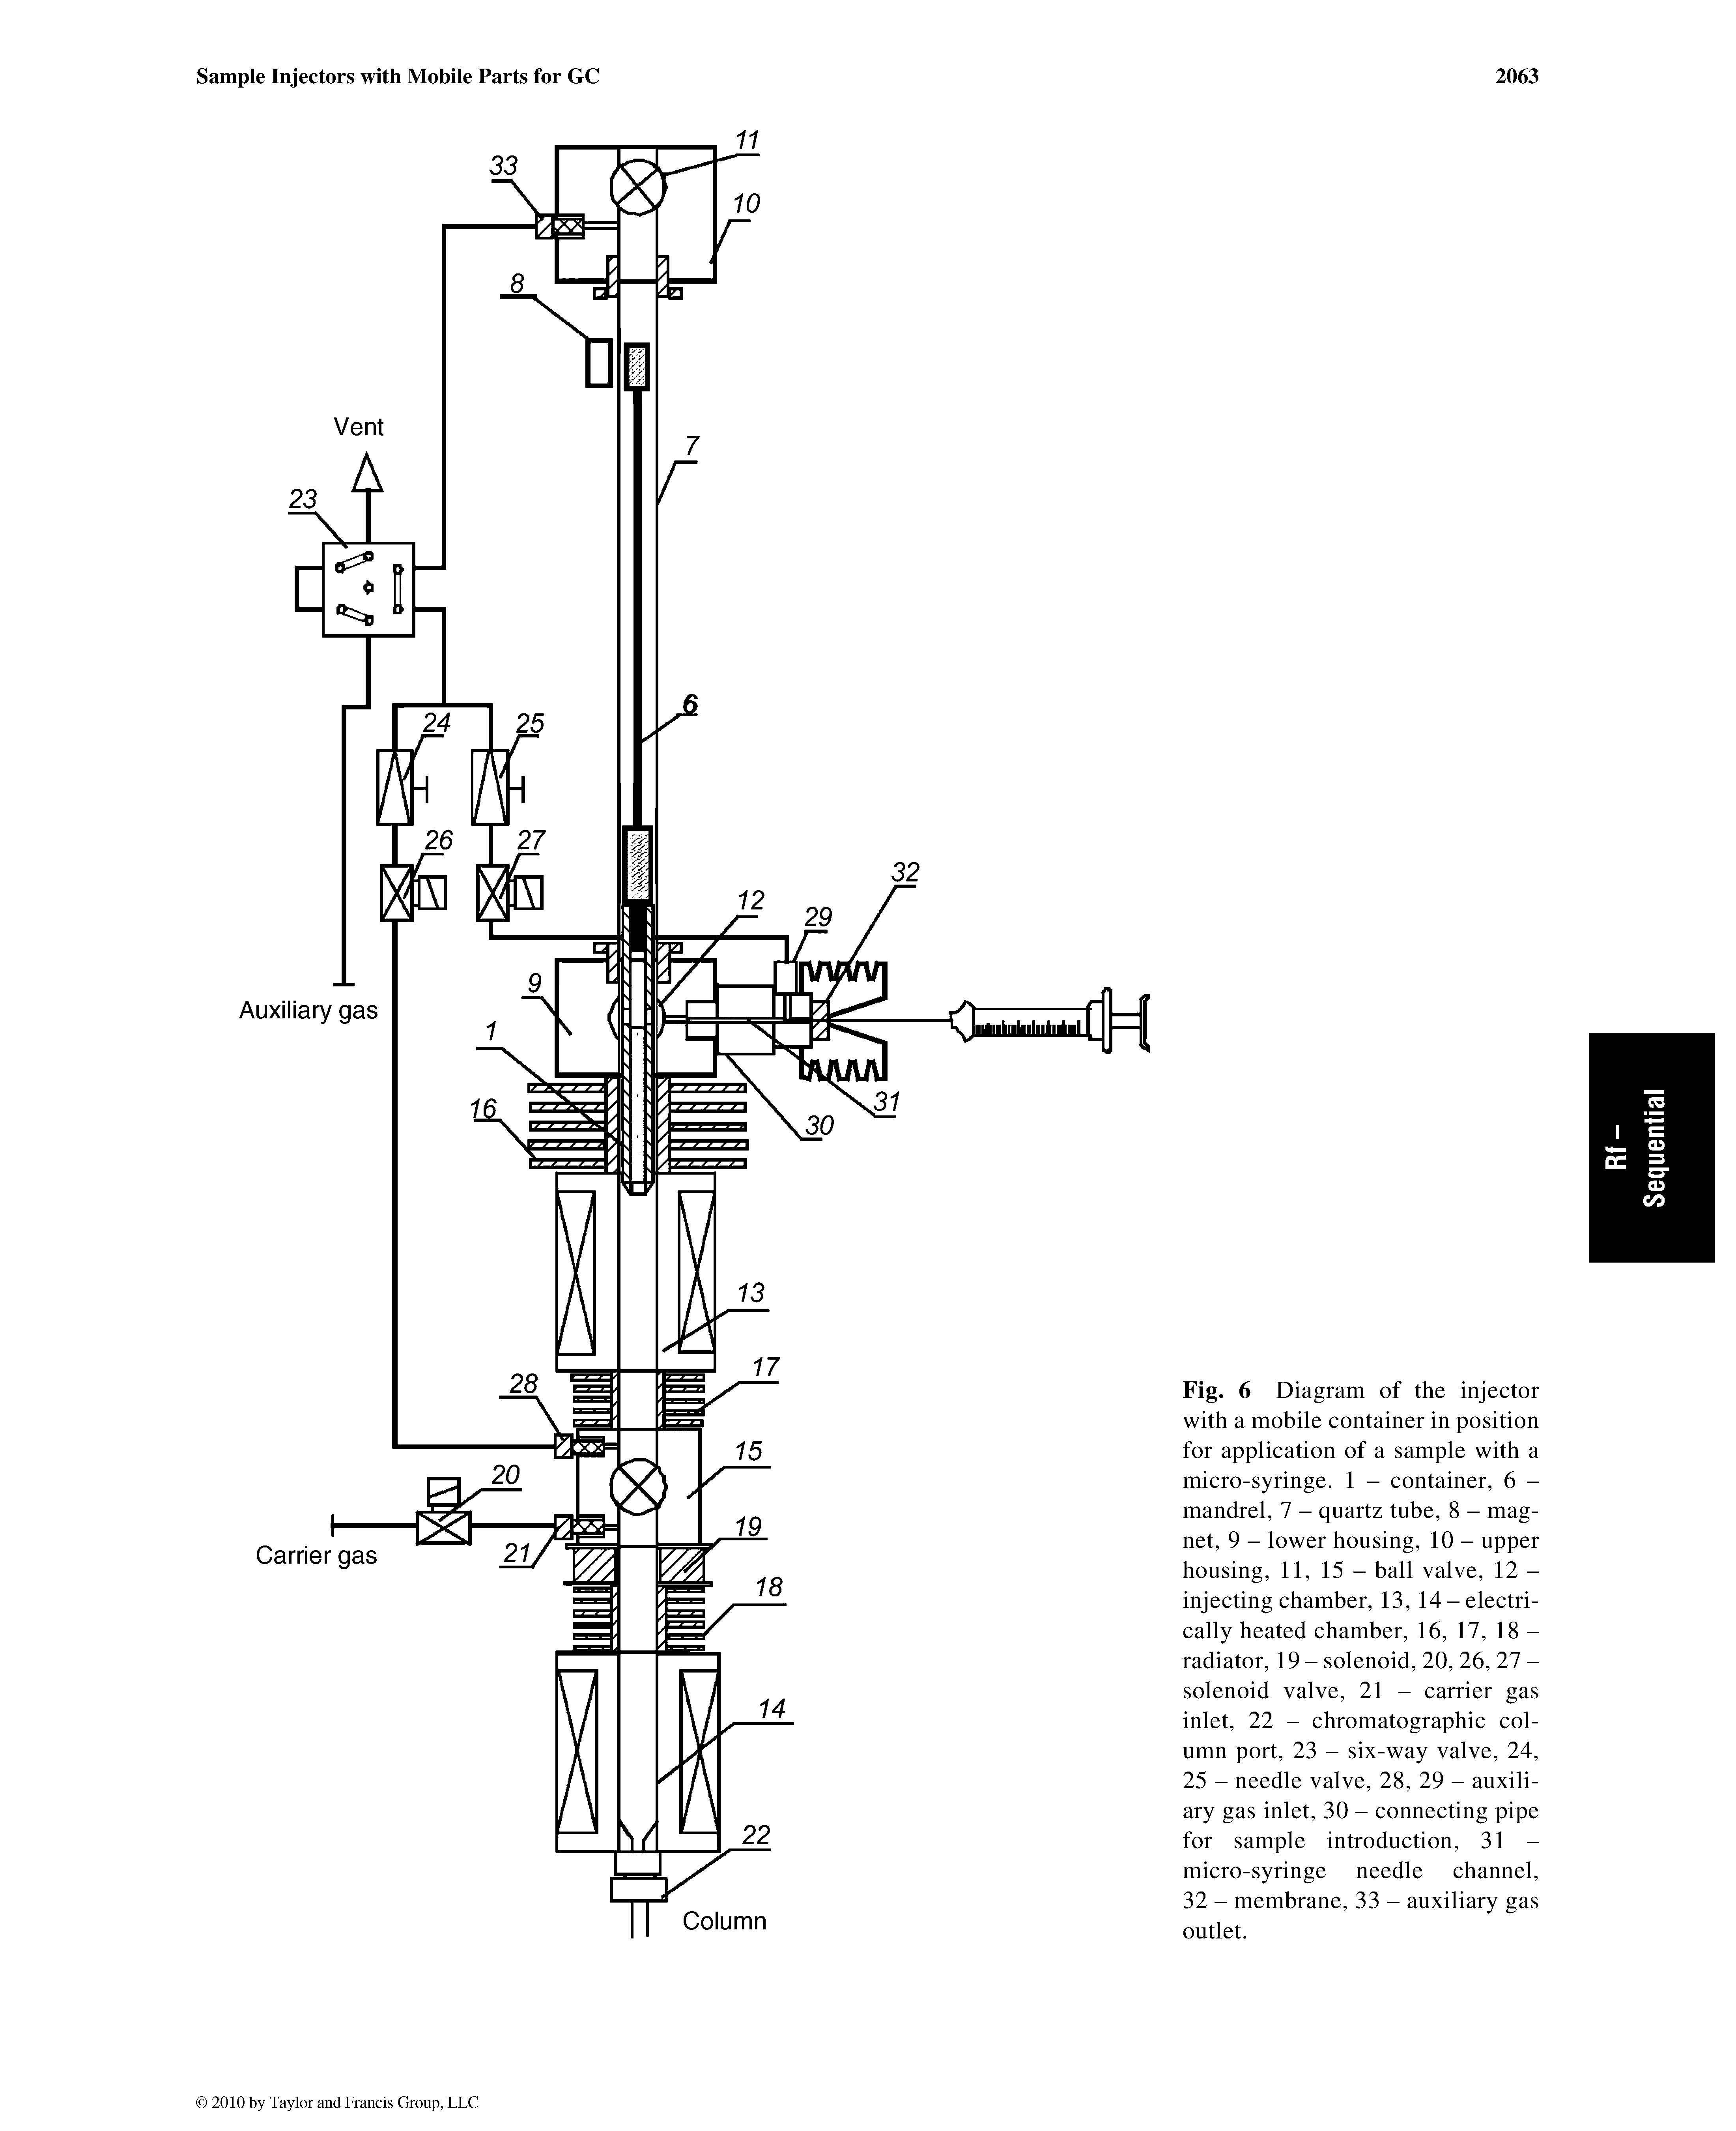 Fig. 6 Diagram of the injector with a mobile container in position for application of a sample with a micro-syringe. 1 - container, 6 -mandrel, 7 - quartz tube, 8 - magnet, 9 - lower housing, 10 - upper housing, 11, 15 - ball valve, 12 -injecting chamber, 13, 14 - electrically heated chamber, 16, 17, 18 -radiator, 19 - solenoid, 20, 26, 27 -solenoid valve, 21 - carrier gas inlet, 22 - chromatographic column port, 23 - six-way valve, 24, 25 - needle valve, 28, 29 - auxiliary gas inlet, 30 - connecting pipe for sample introduction, 31 -micro-syringe needle channel, 32 - membrane, 33 - auxiliary gas outlet.